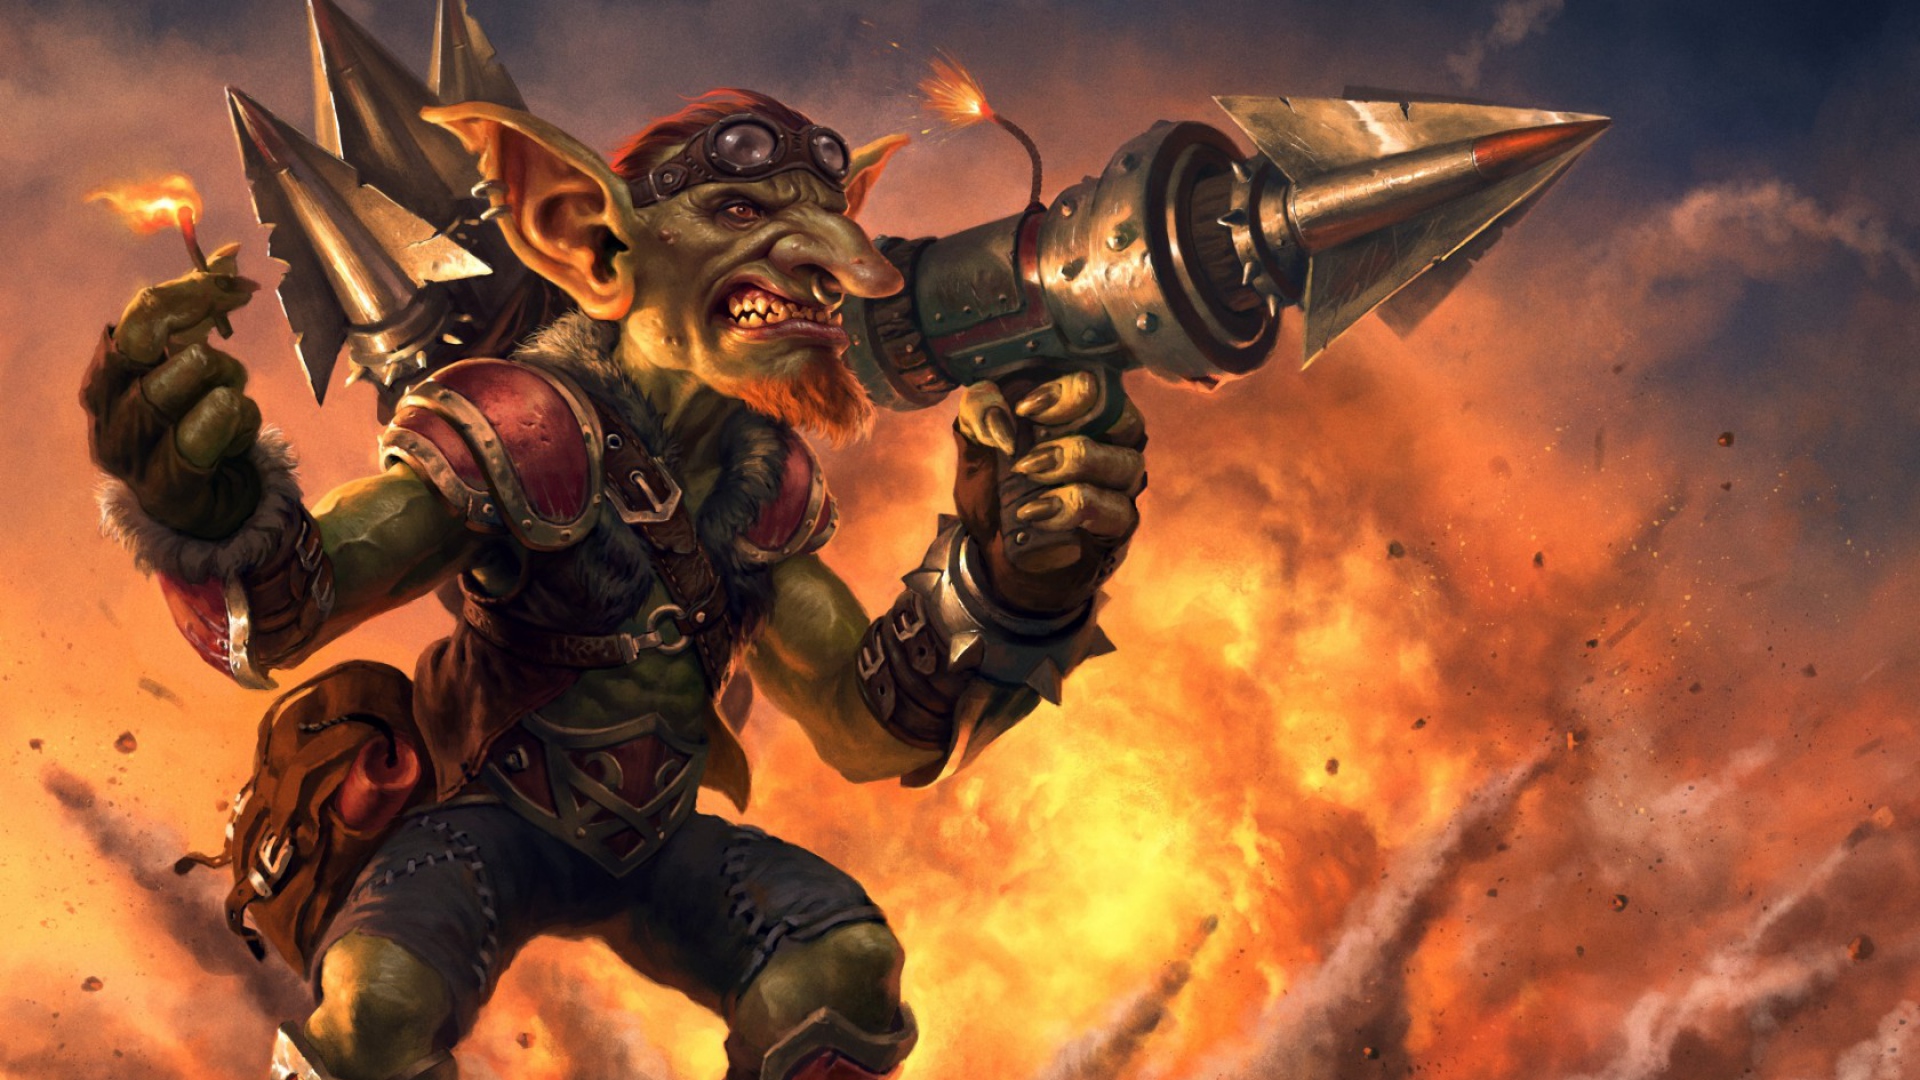 Best Goblin Wallpaper In High Quality Background